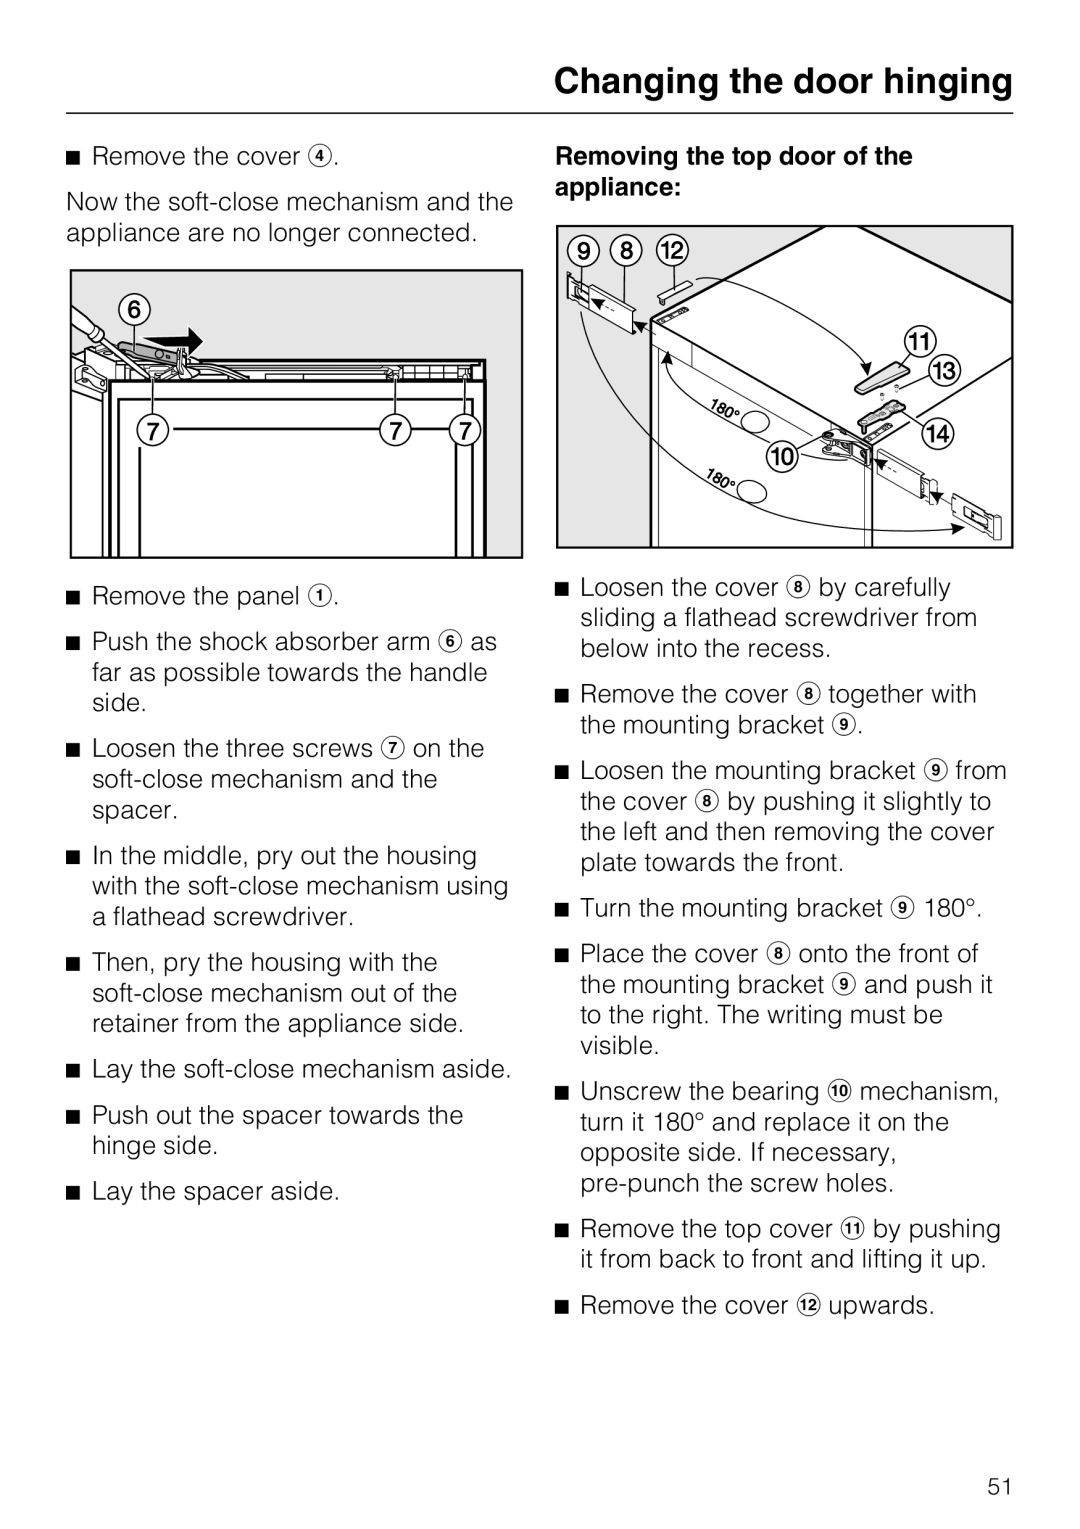 Miele KFN 14943 SD ED installation instructions Removing the top door of the appliance, Changing the door hinging 